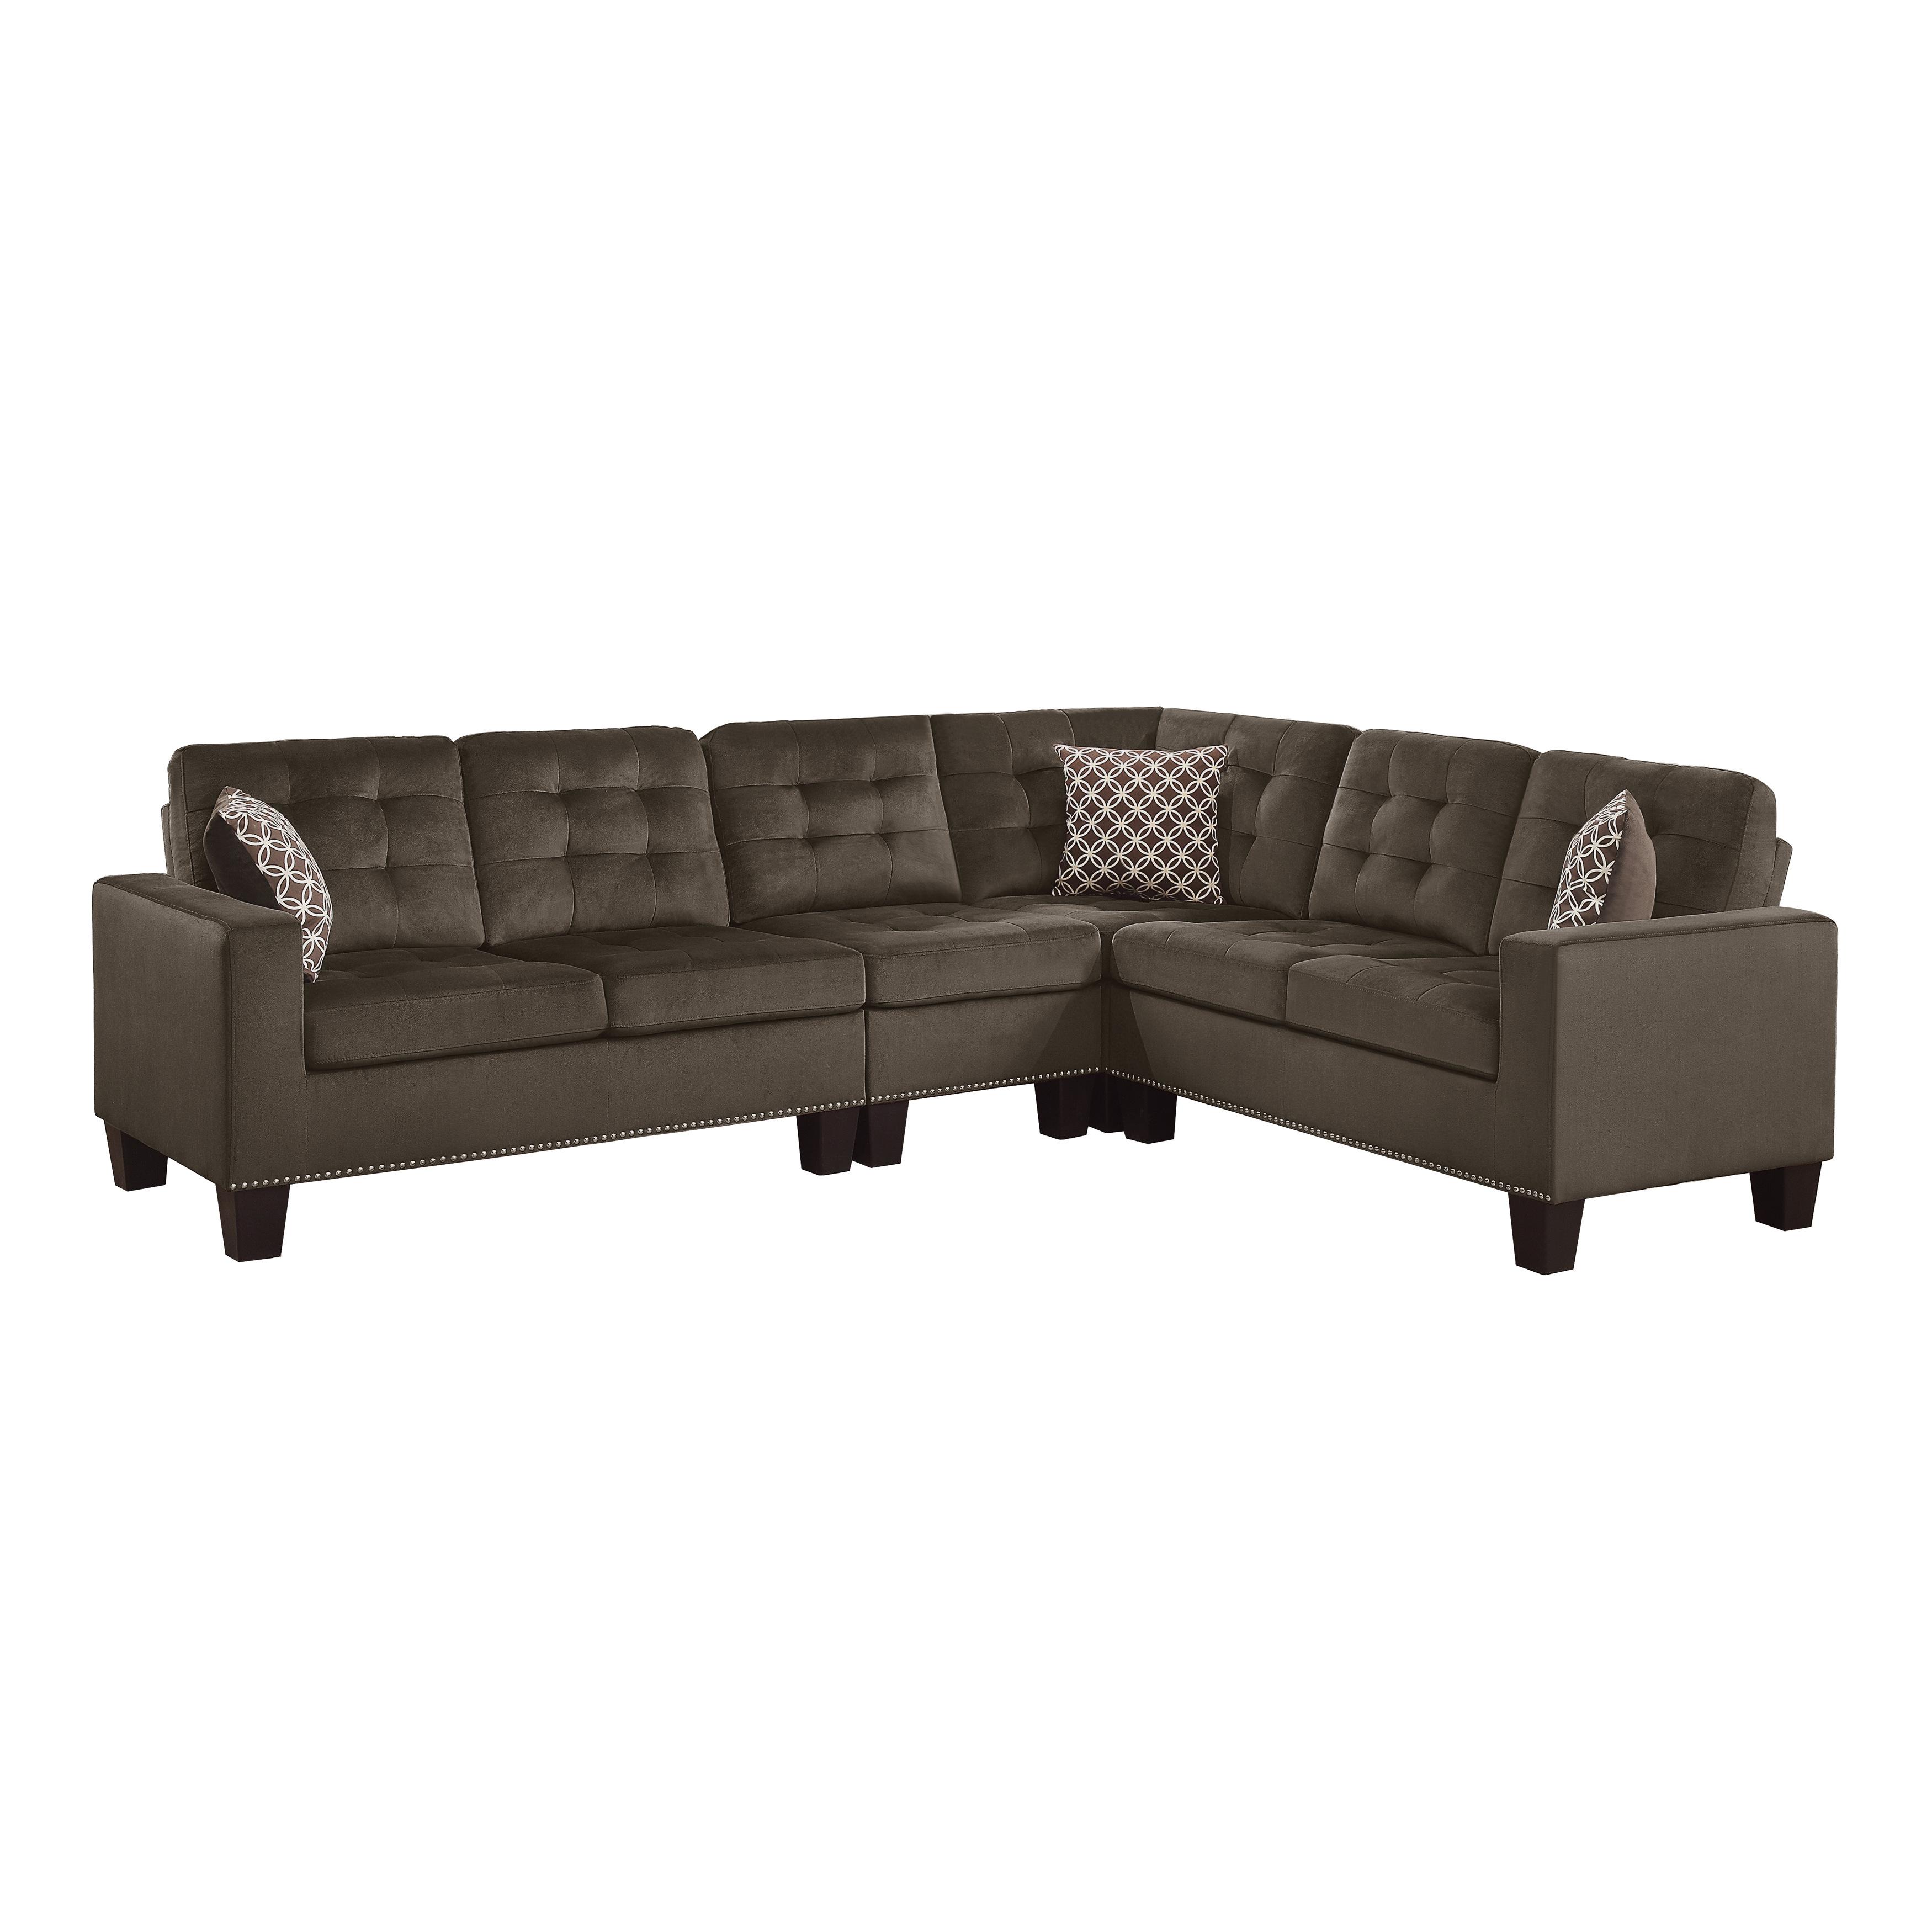 Traditional Sectional 9957CH*SC Lantana 9957CH*SC in Chocolate Microfiber